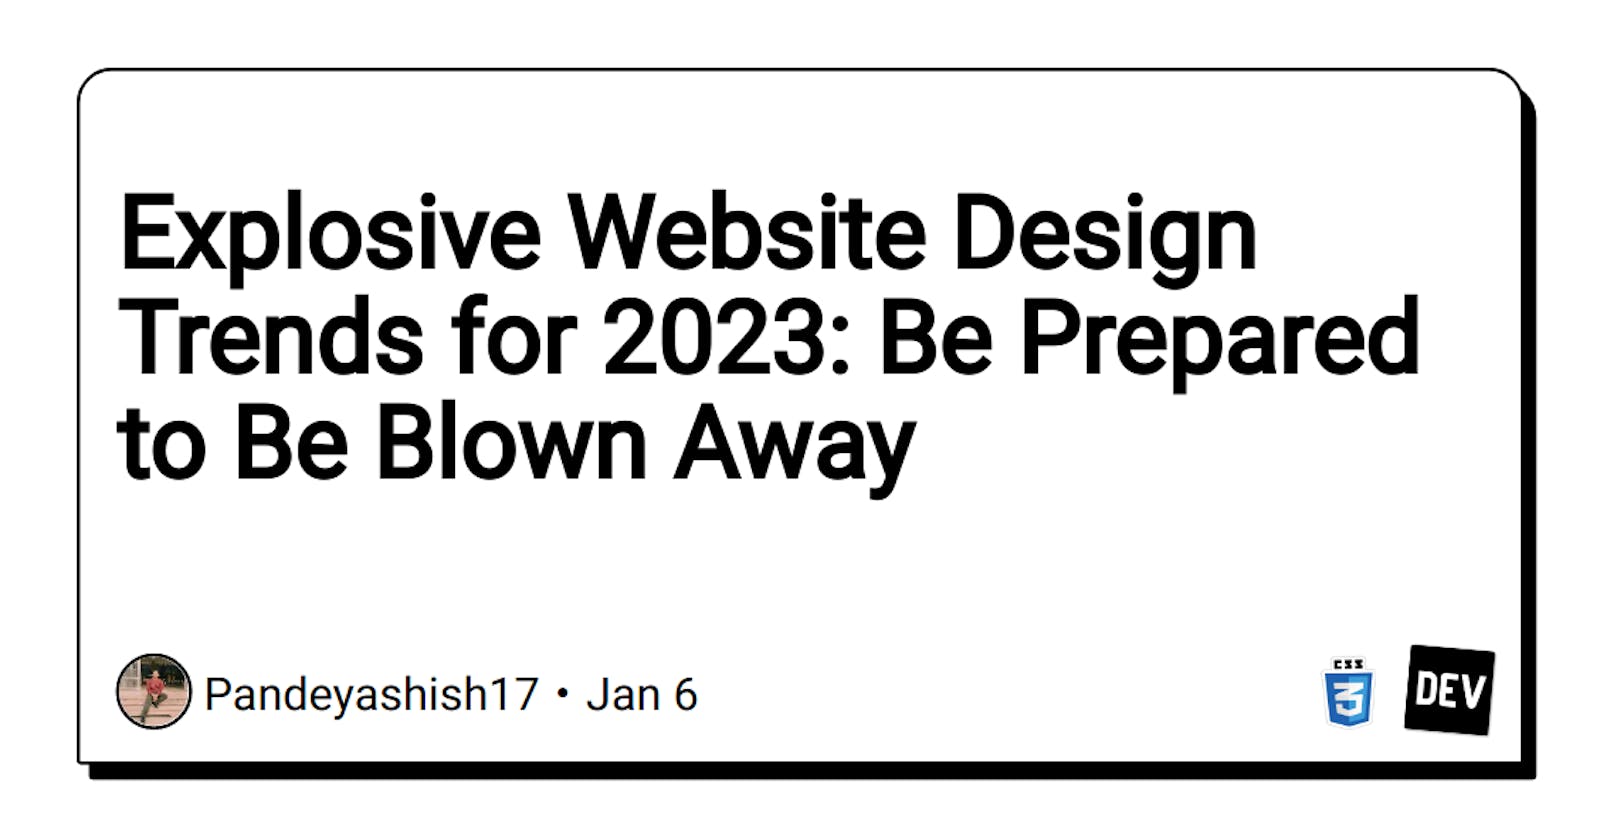 Explosive Website Design Trends for 2023: Be Prepared to Be Blown Away